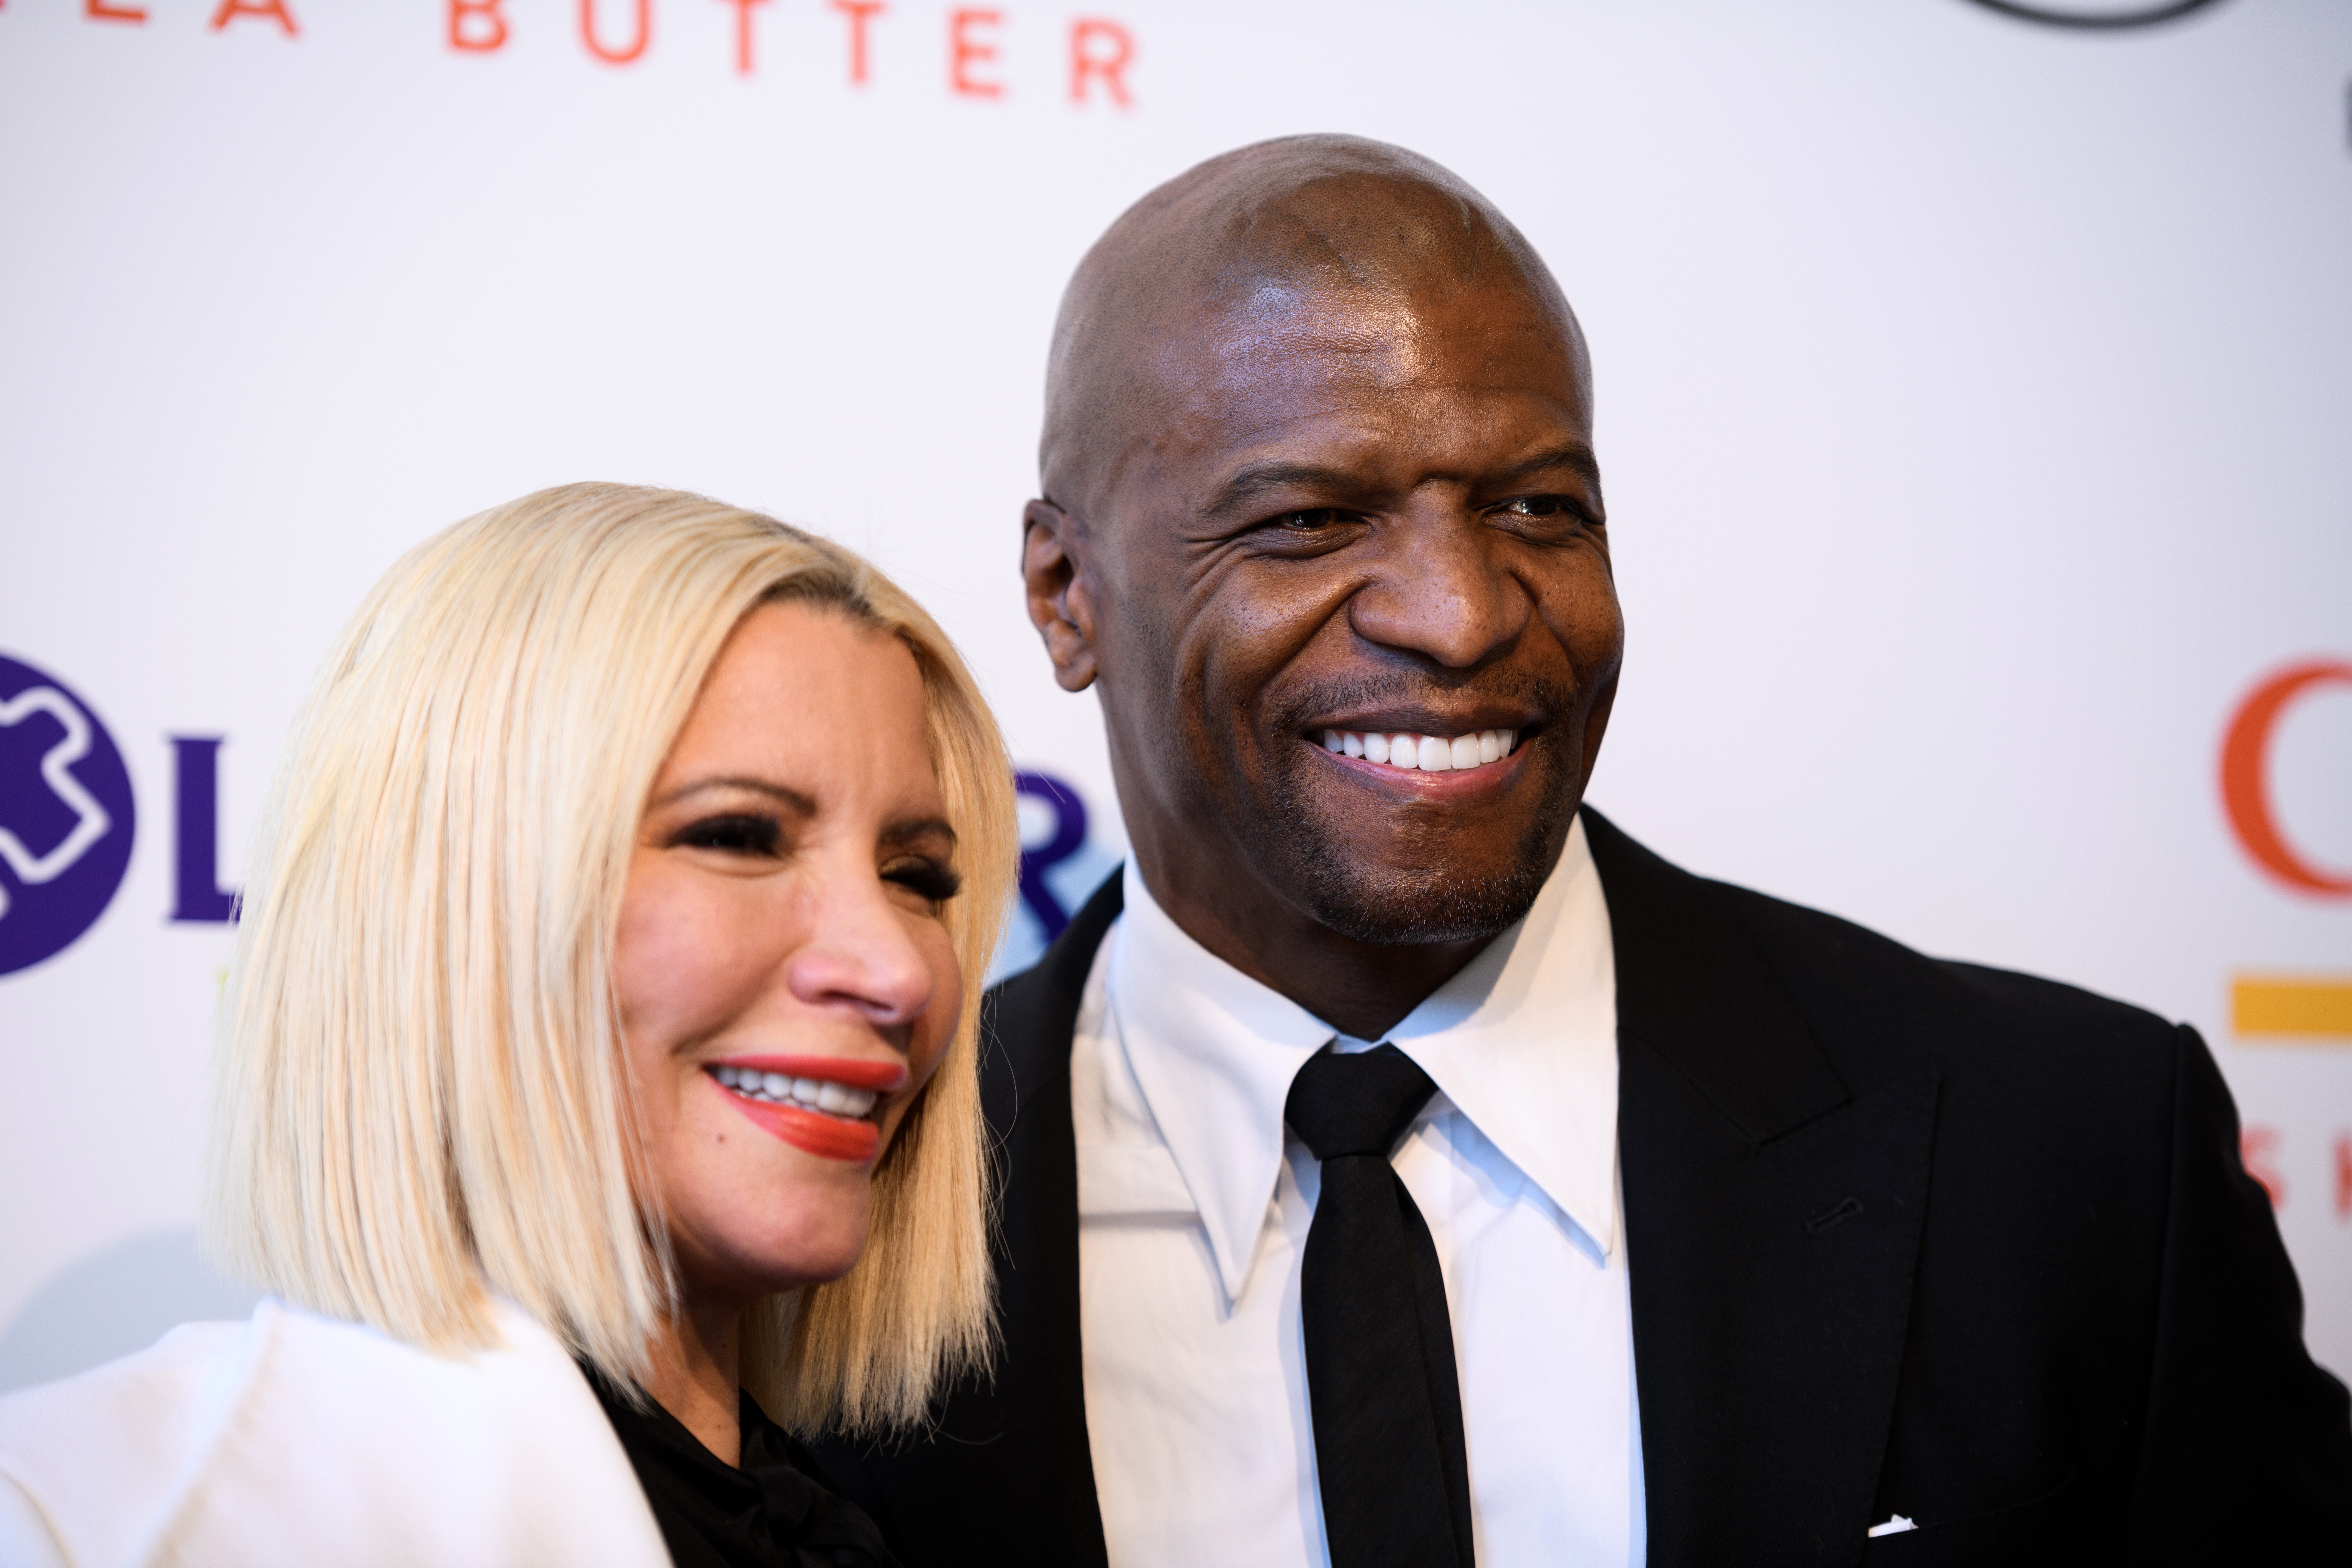 Terry Crews and Rebecca King-Crews attend the 21st Annual NFL Players' Wives Association charity fashion show at Santa Monica Place on February 11, 2022, in Santa Monica, California. | Source: Getty Images